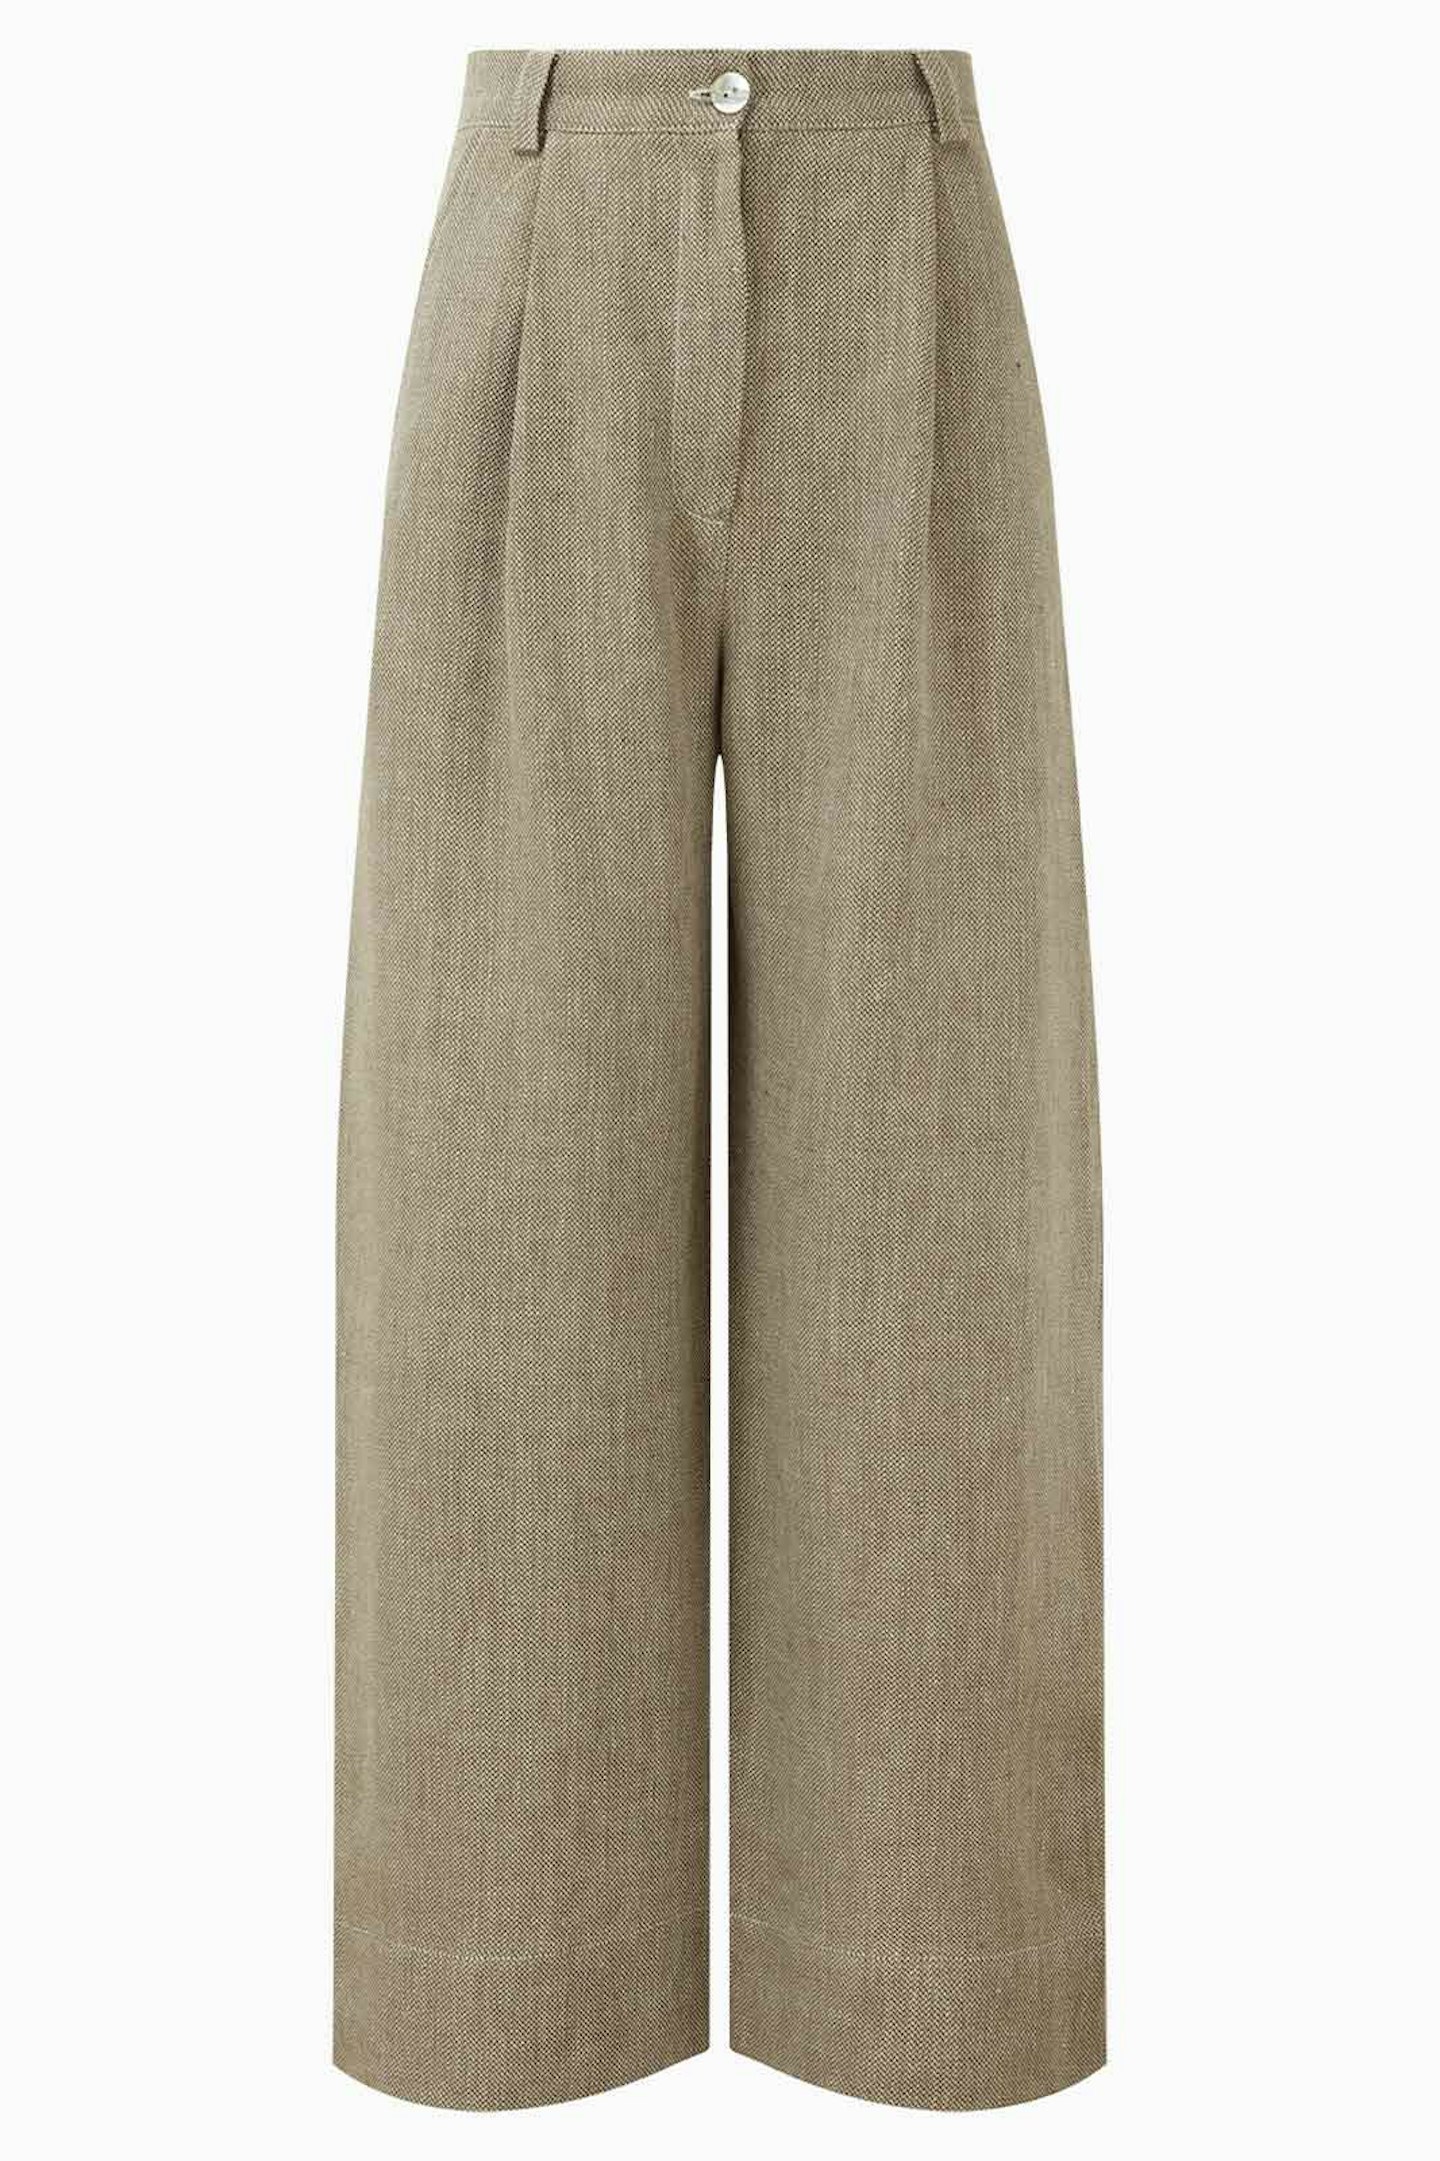 Arkitaip, The Wabi Pleated Linen Trousers, WAS £165 NOW £148.50